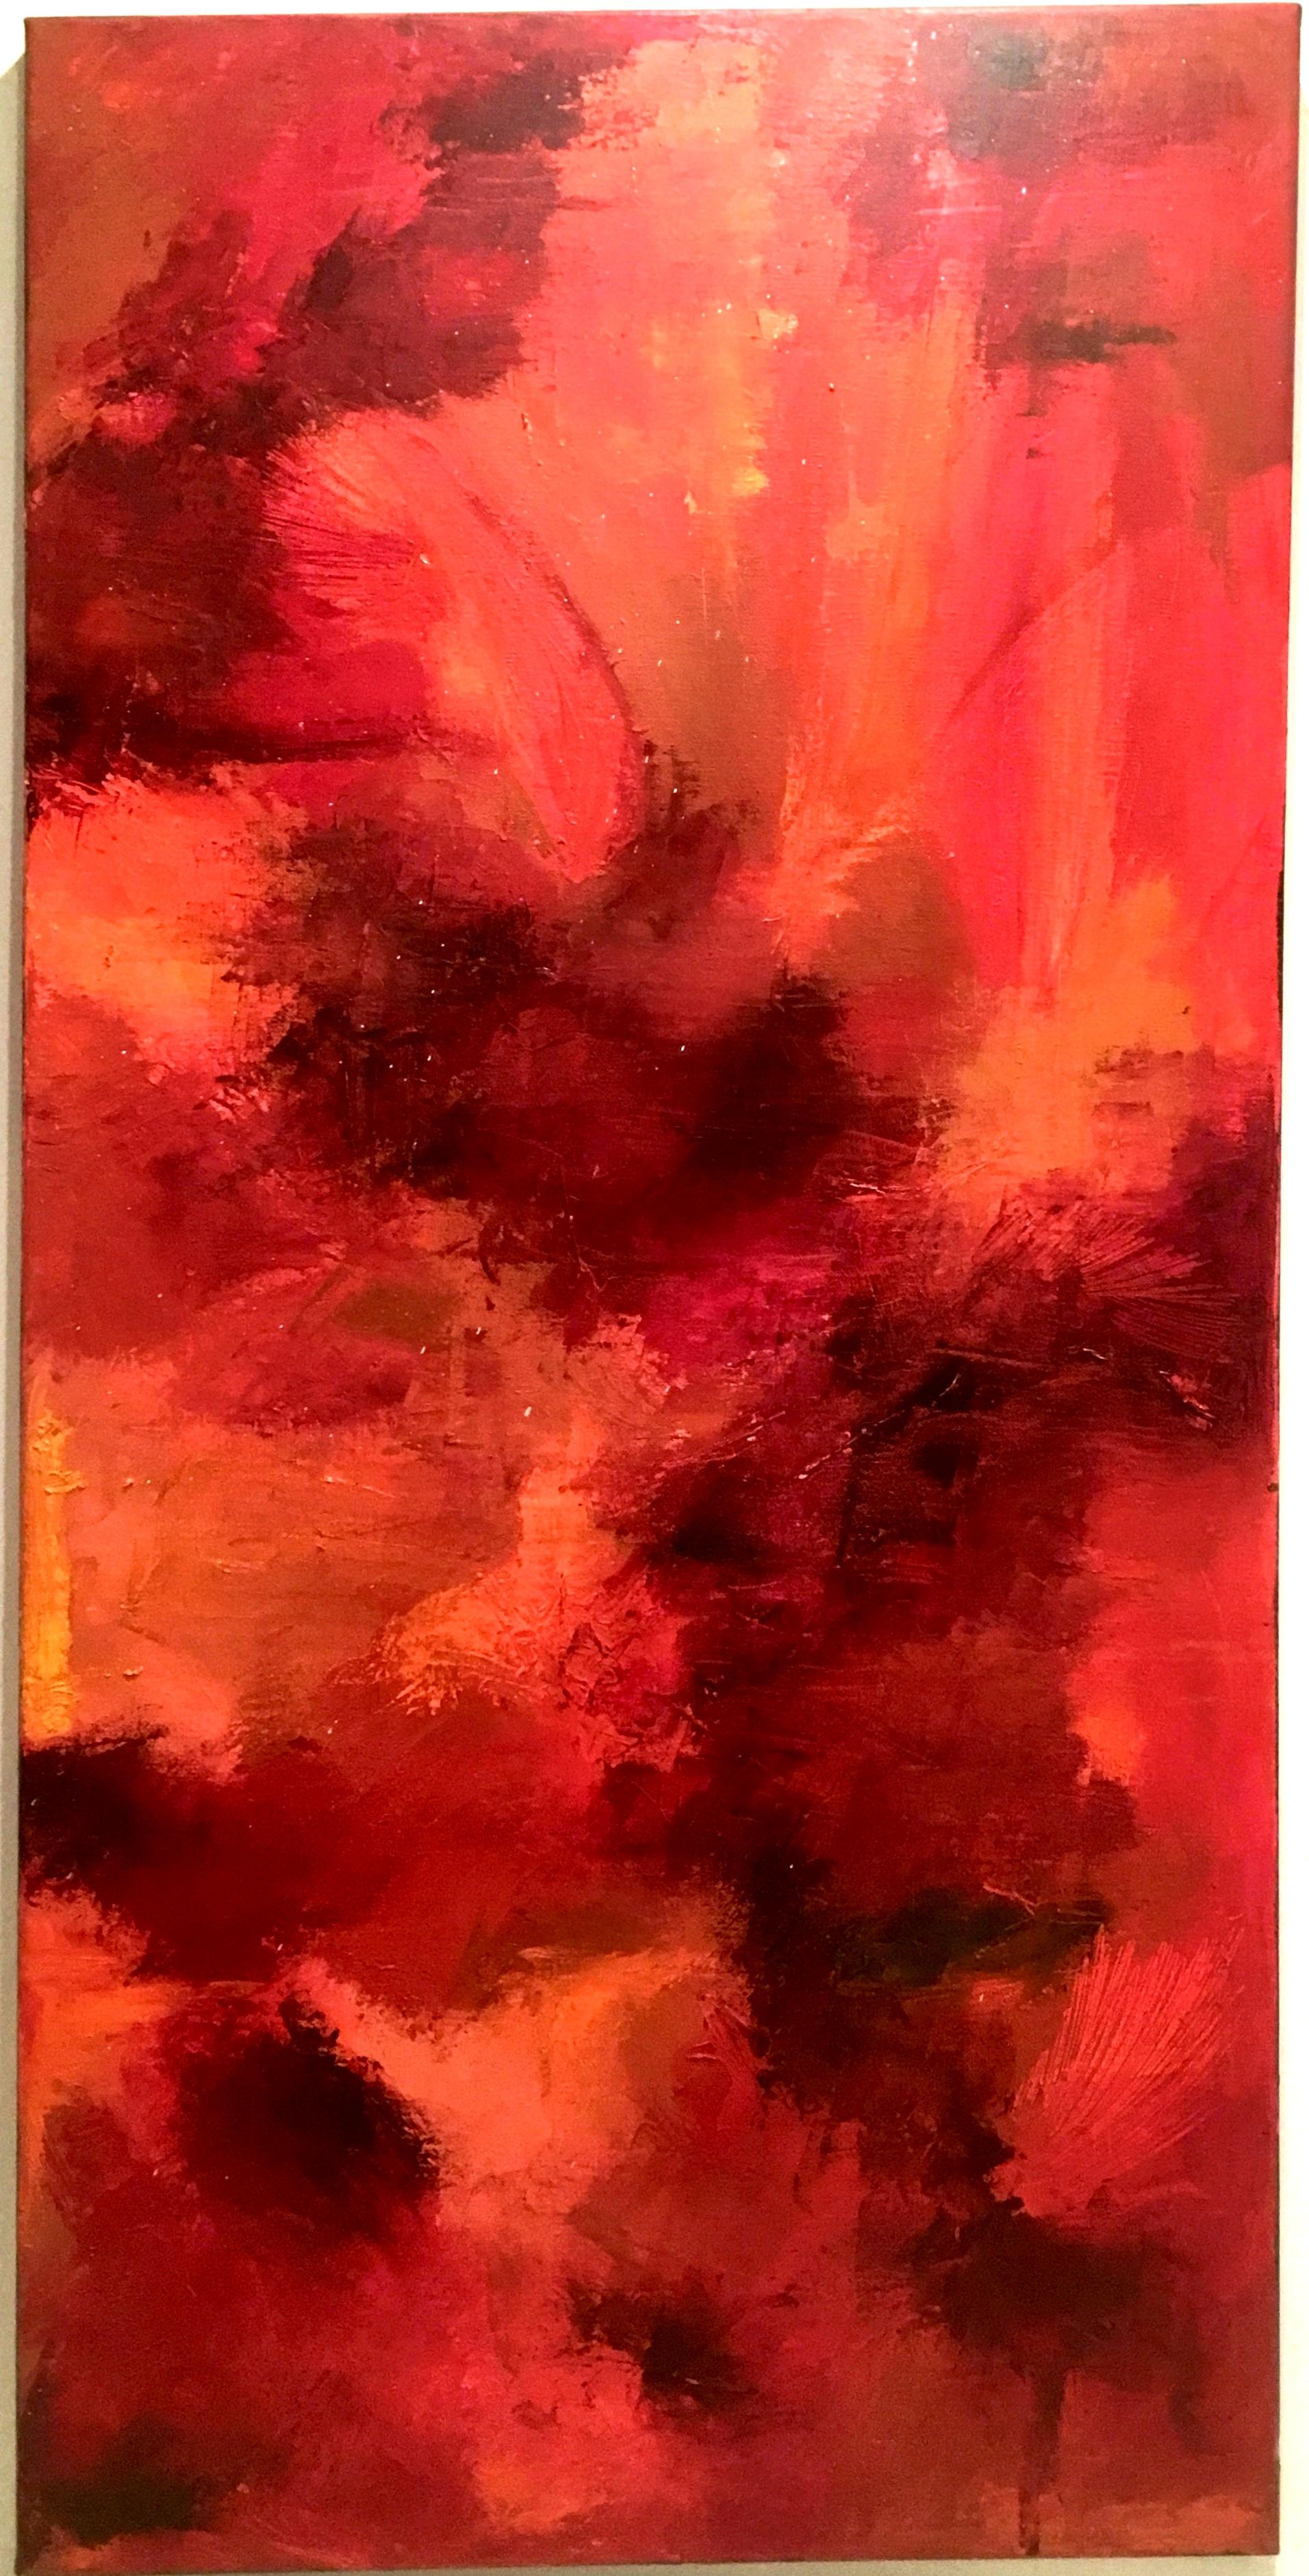 2010 Original oil on canvas abstract painting signed. This large scale four foot abstract painting features textured and vibrant hues of orange, red and yellow. Artist-signed and dated on the reverse-illegible.